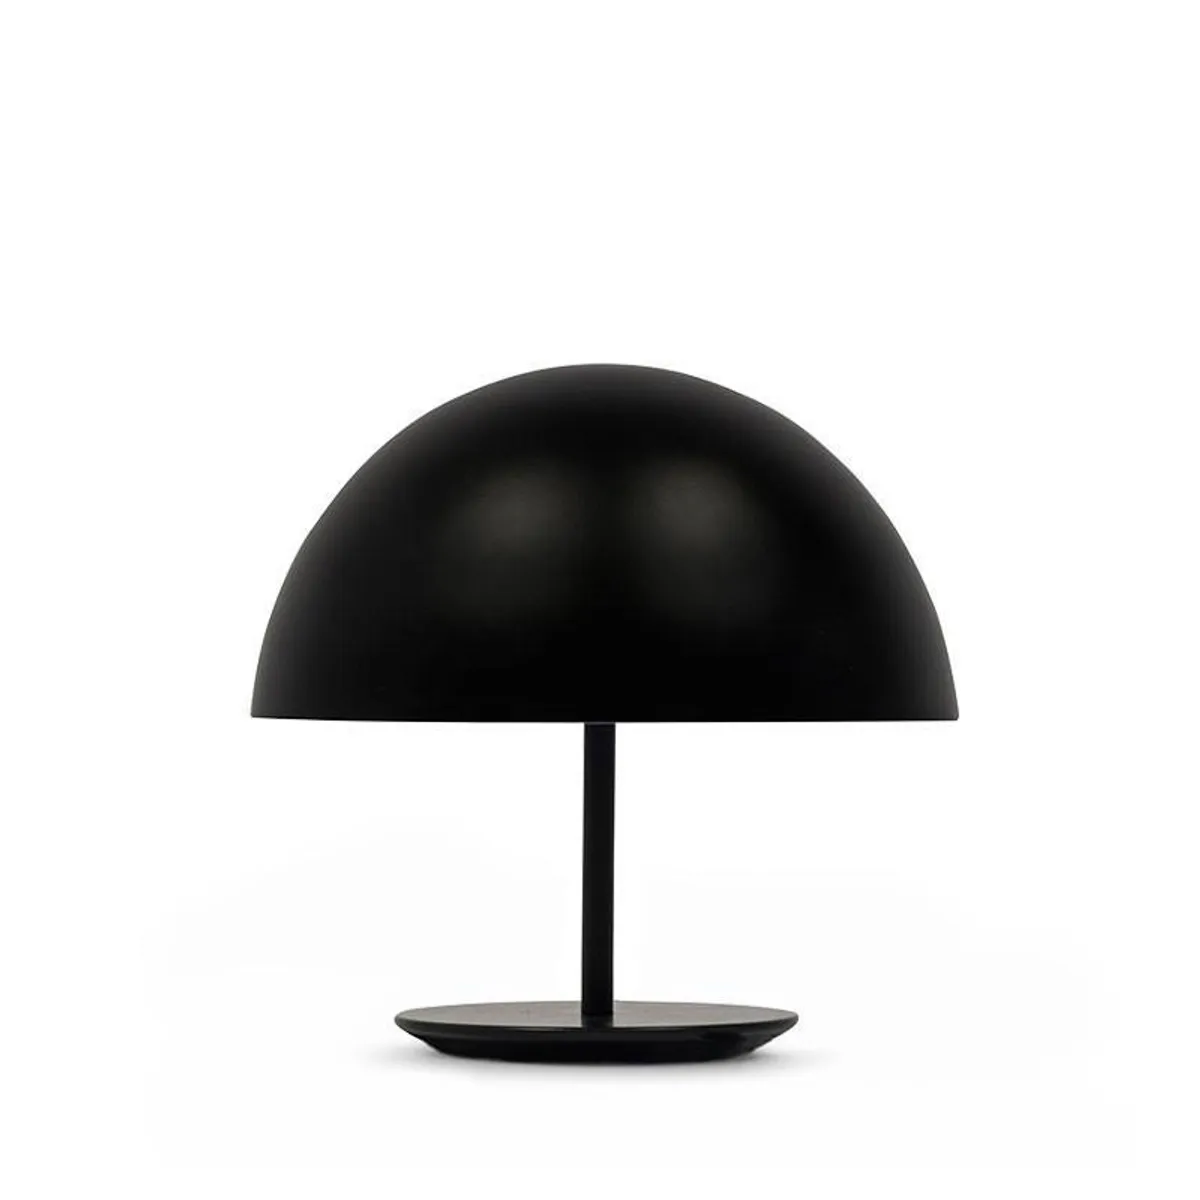 Dome Table Lamp Inside Out Contracts